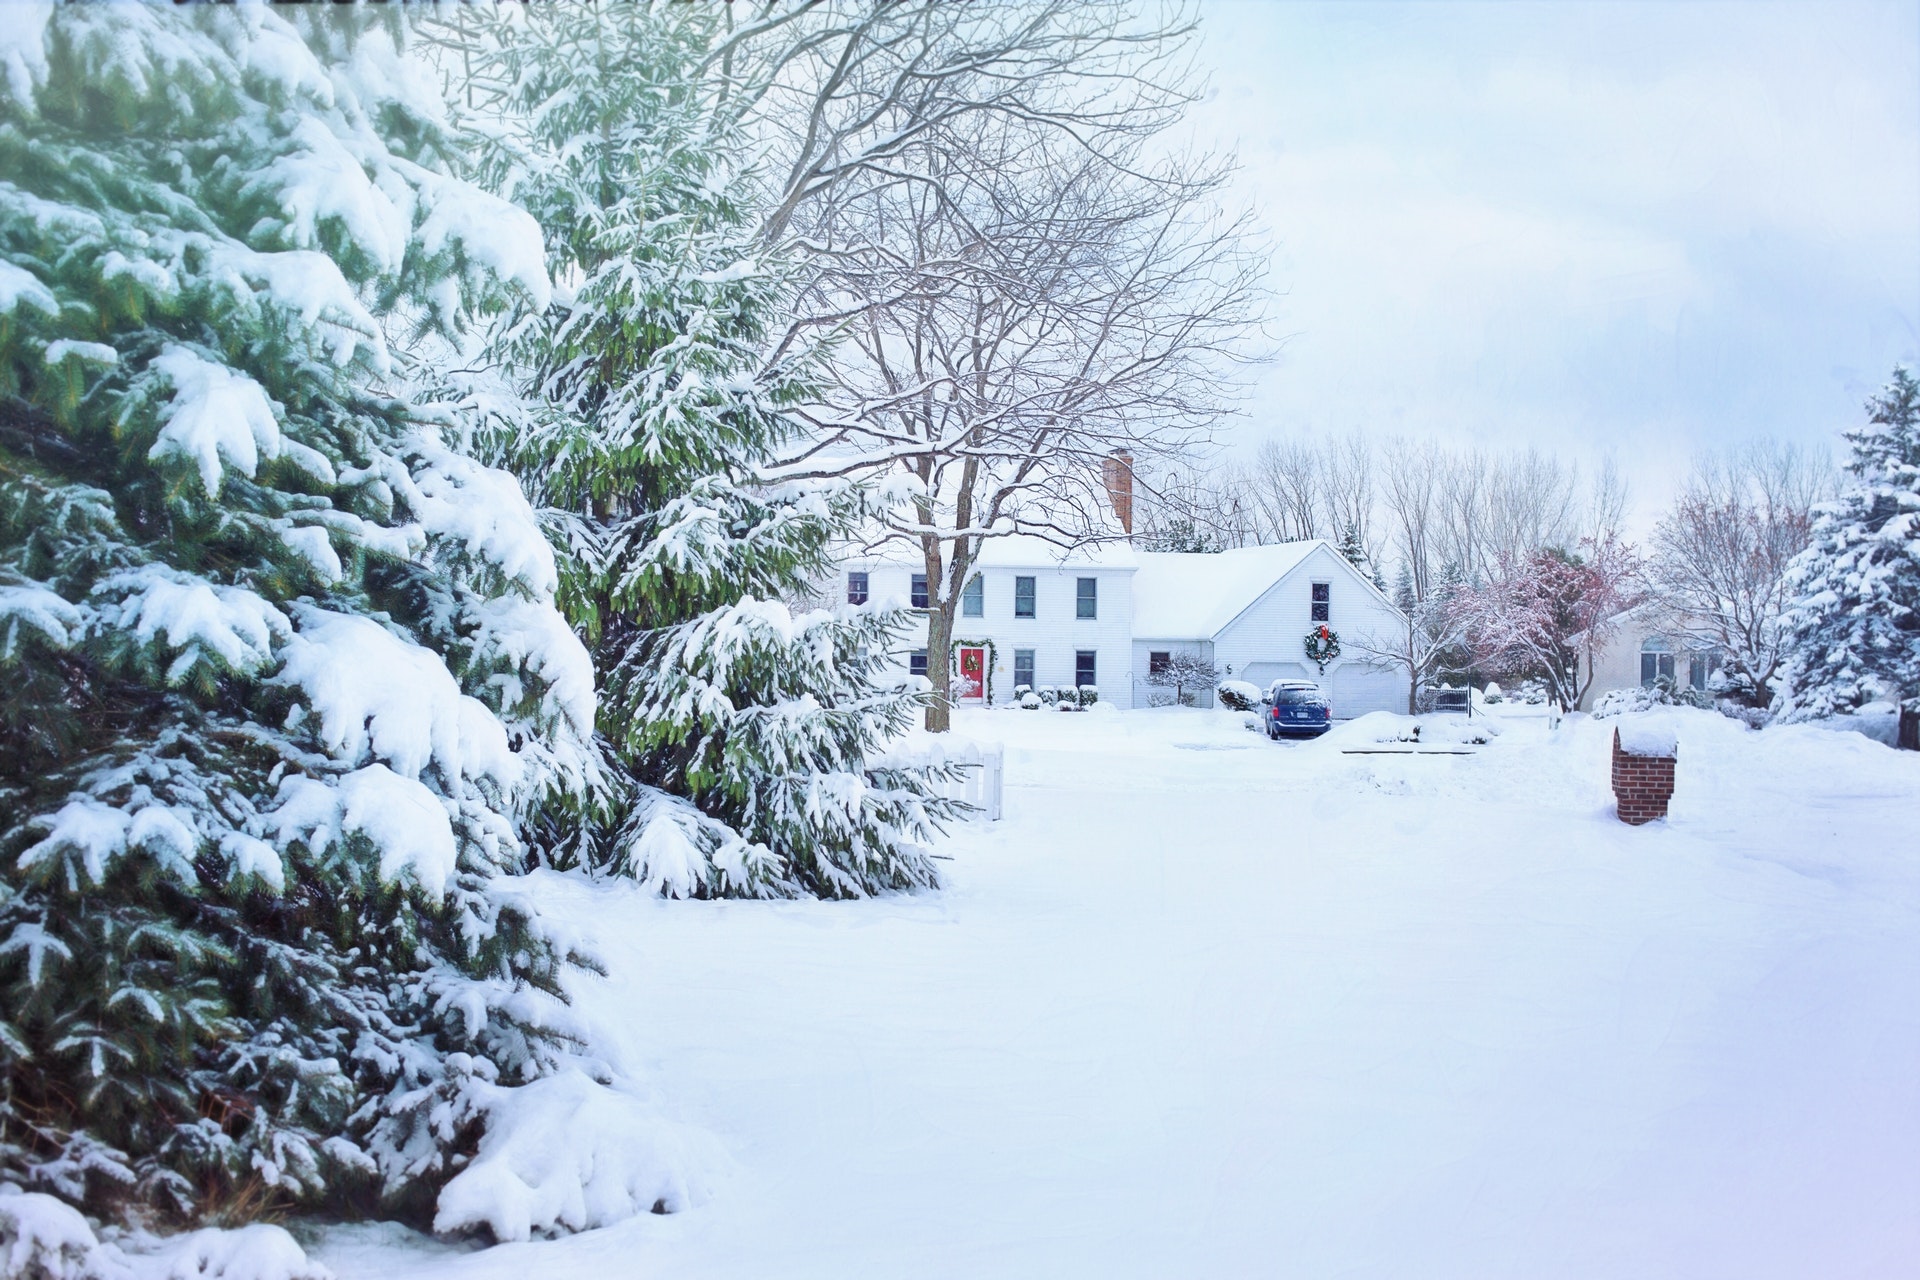 A house surrounded by snow with trees in the foreground